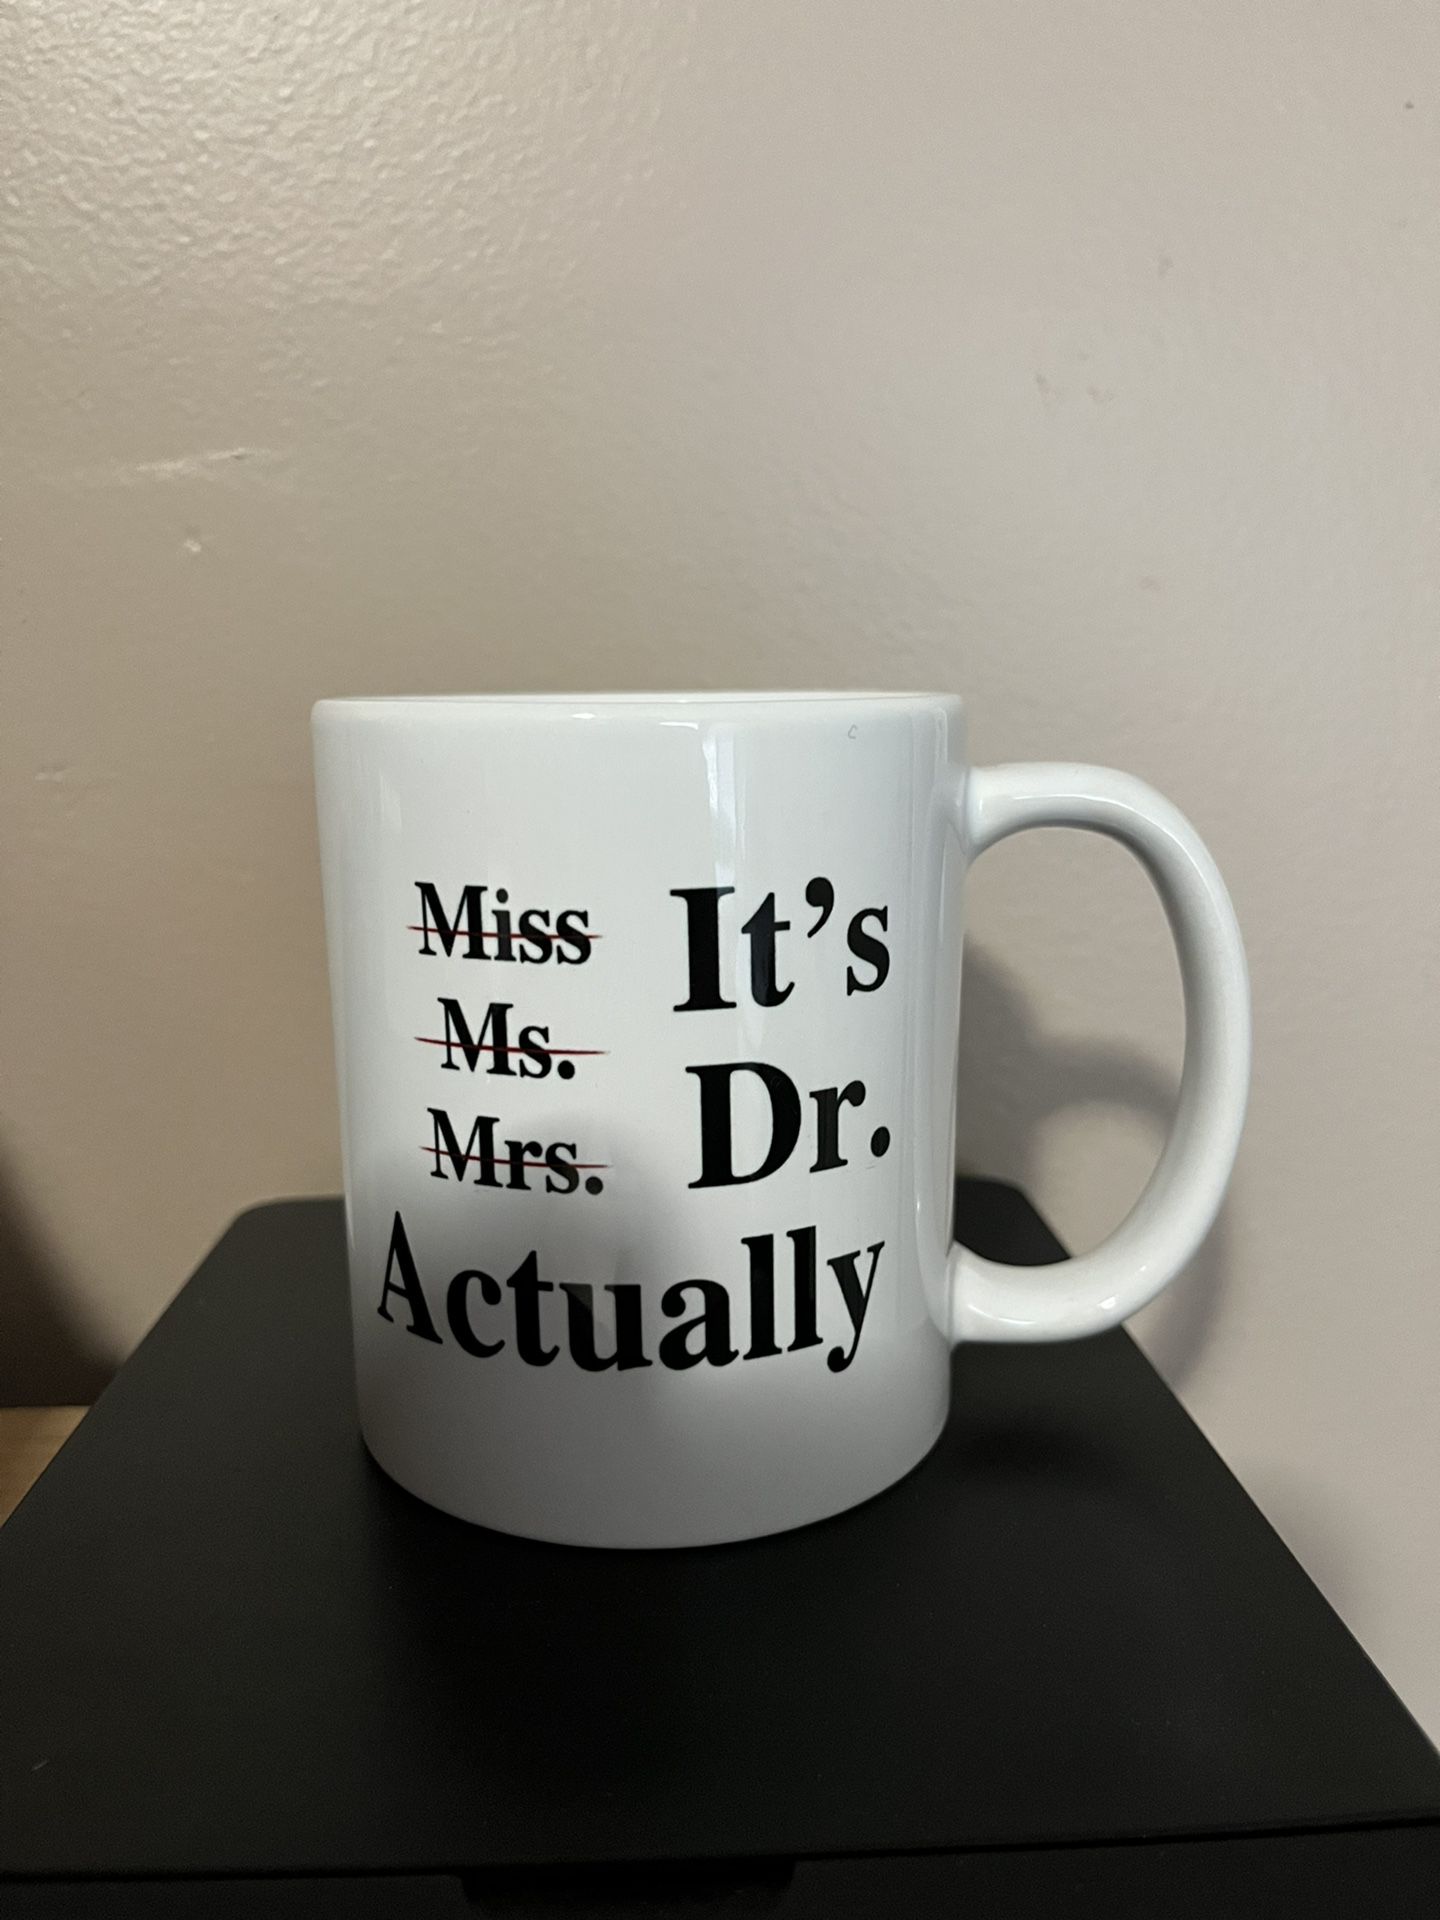 It’s Miss Ms. Mrs. I t’s Dr. Actually Mug Coffee Cup